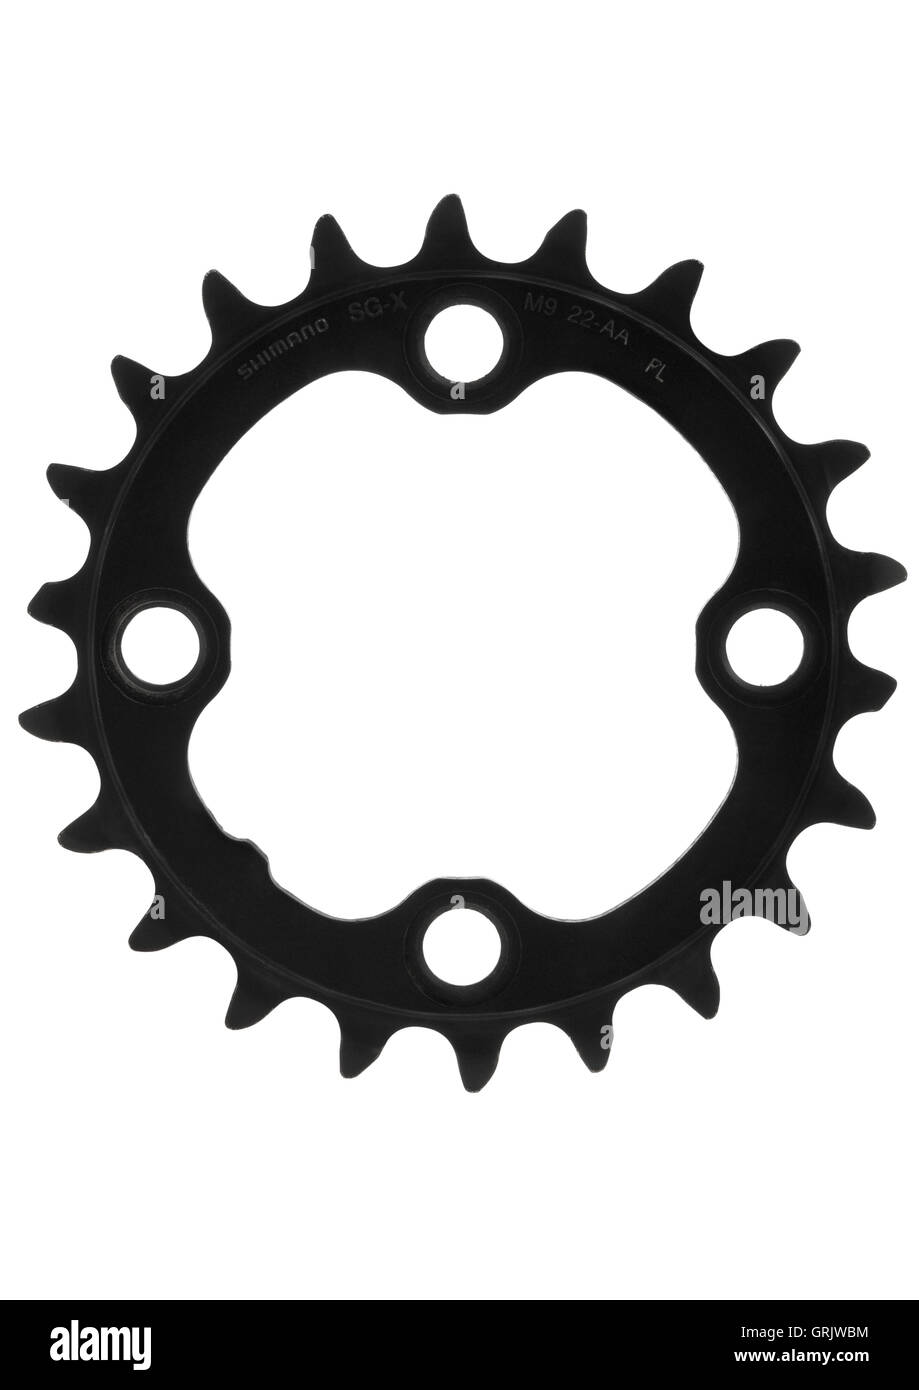 Shimano XT 22 tooth chainring on white background Stock Photo